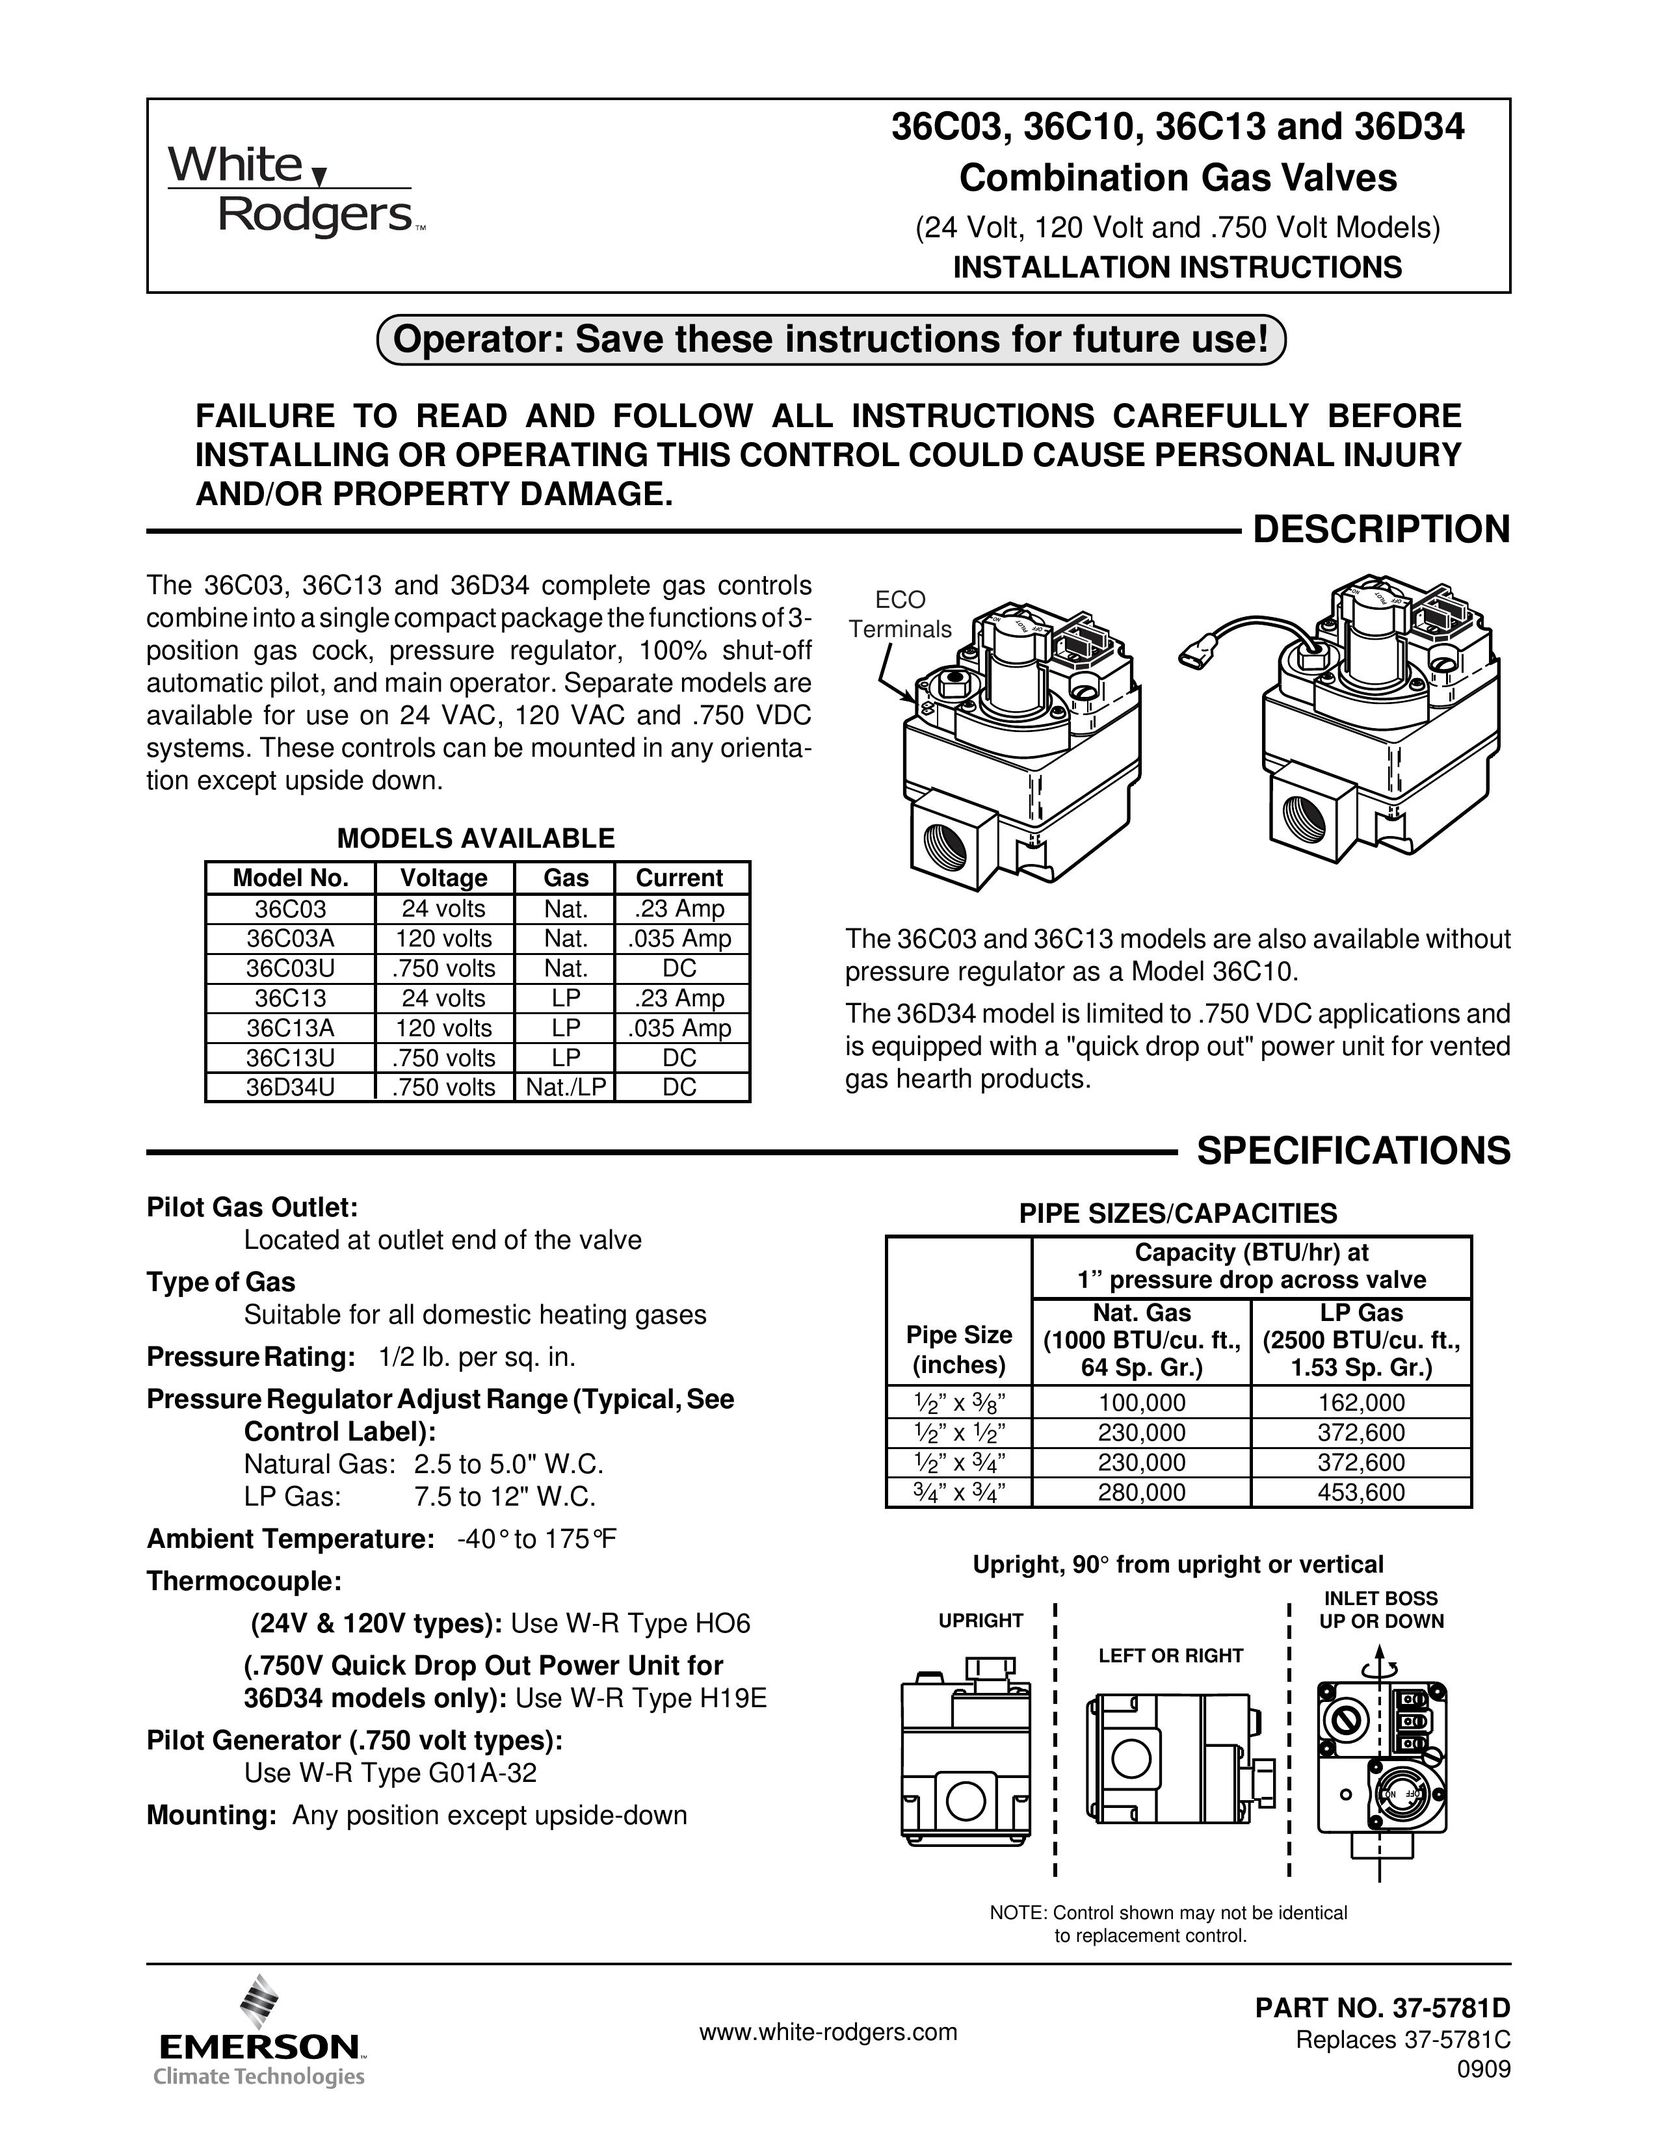 White Rodgers 36C10 Welding Consumables User Manual